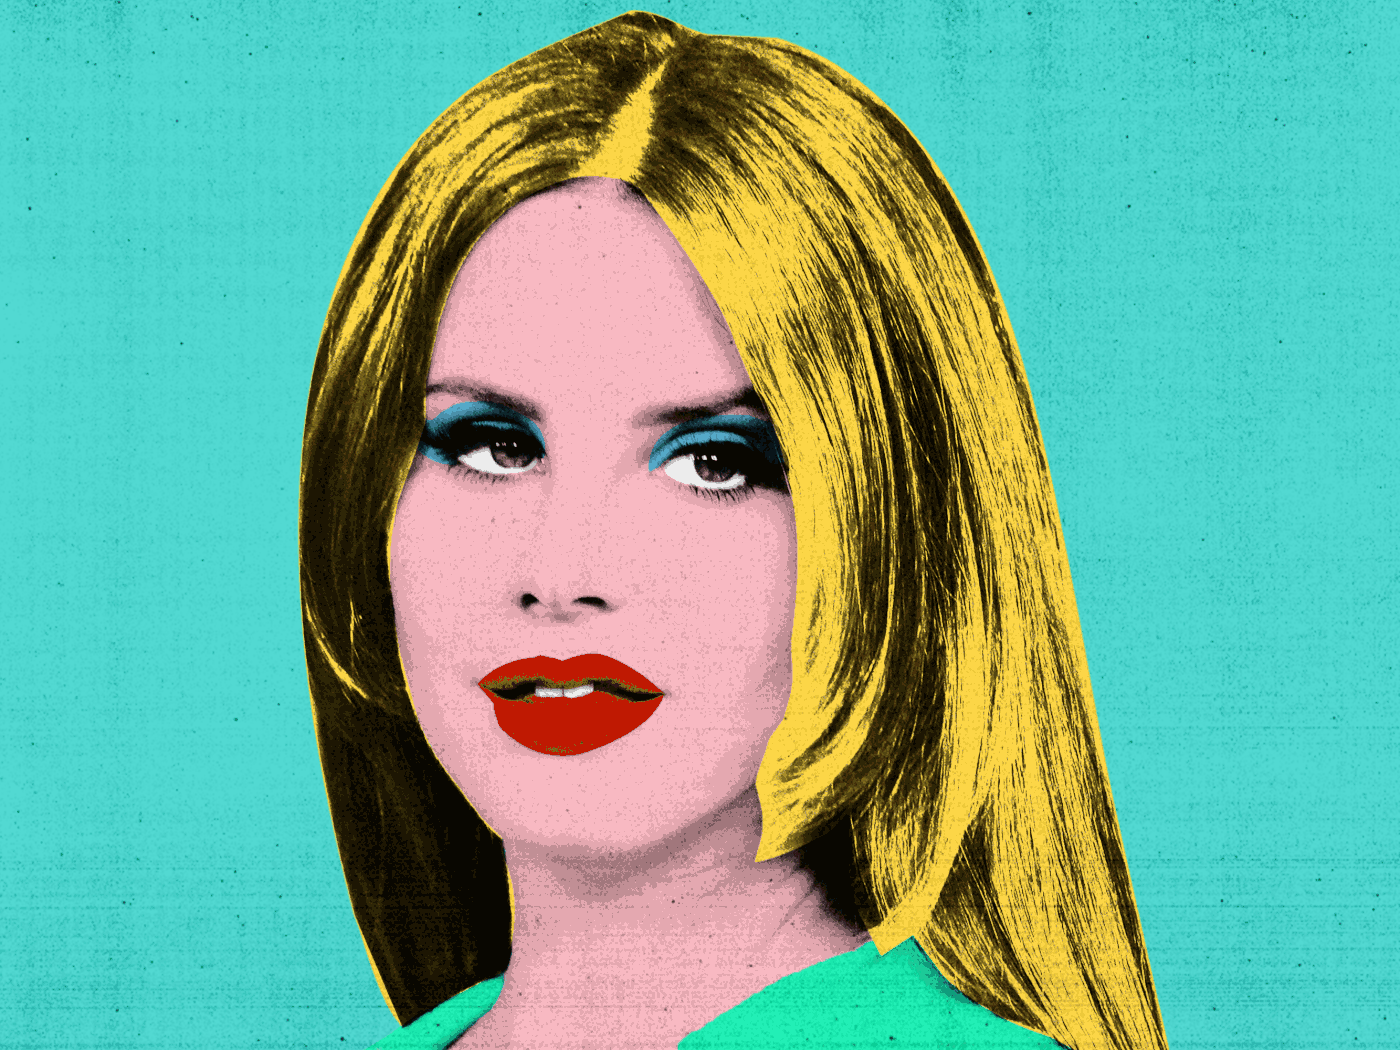 A portrait of a woman with bright makeup and blonde hair. - Lana Del Rey